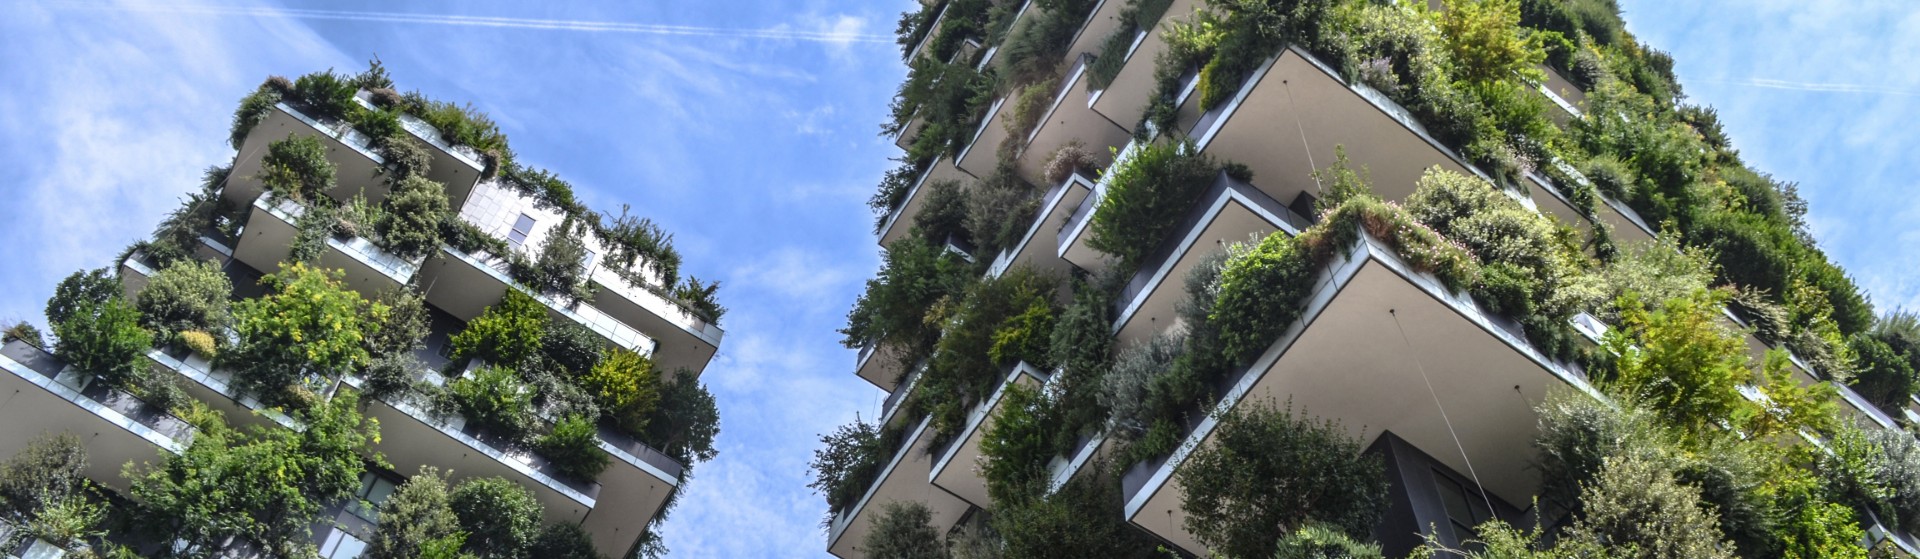 A photograph looking up at high rise commercial building with lots of foliage.